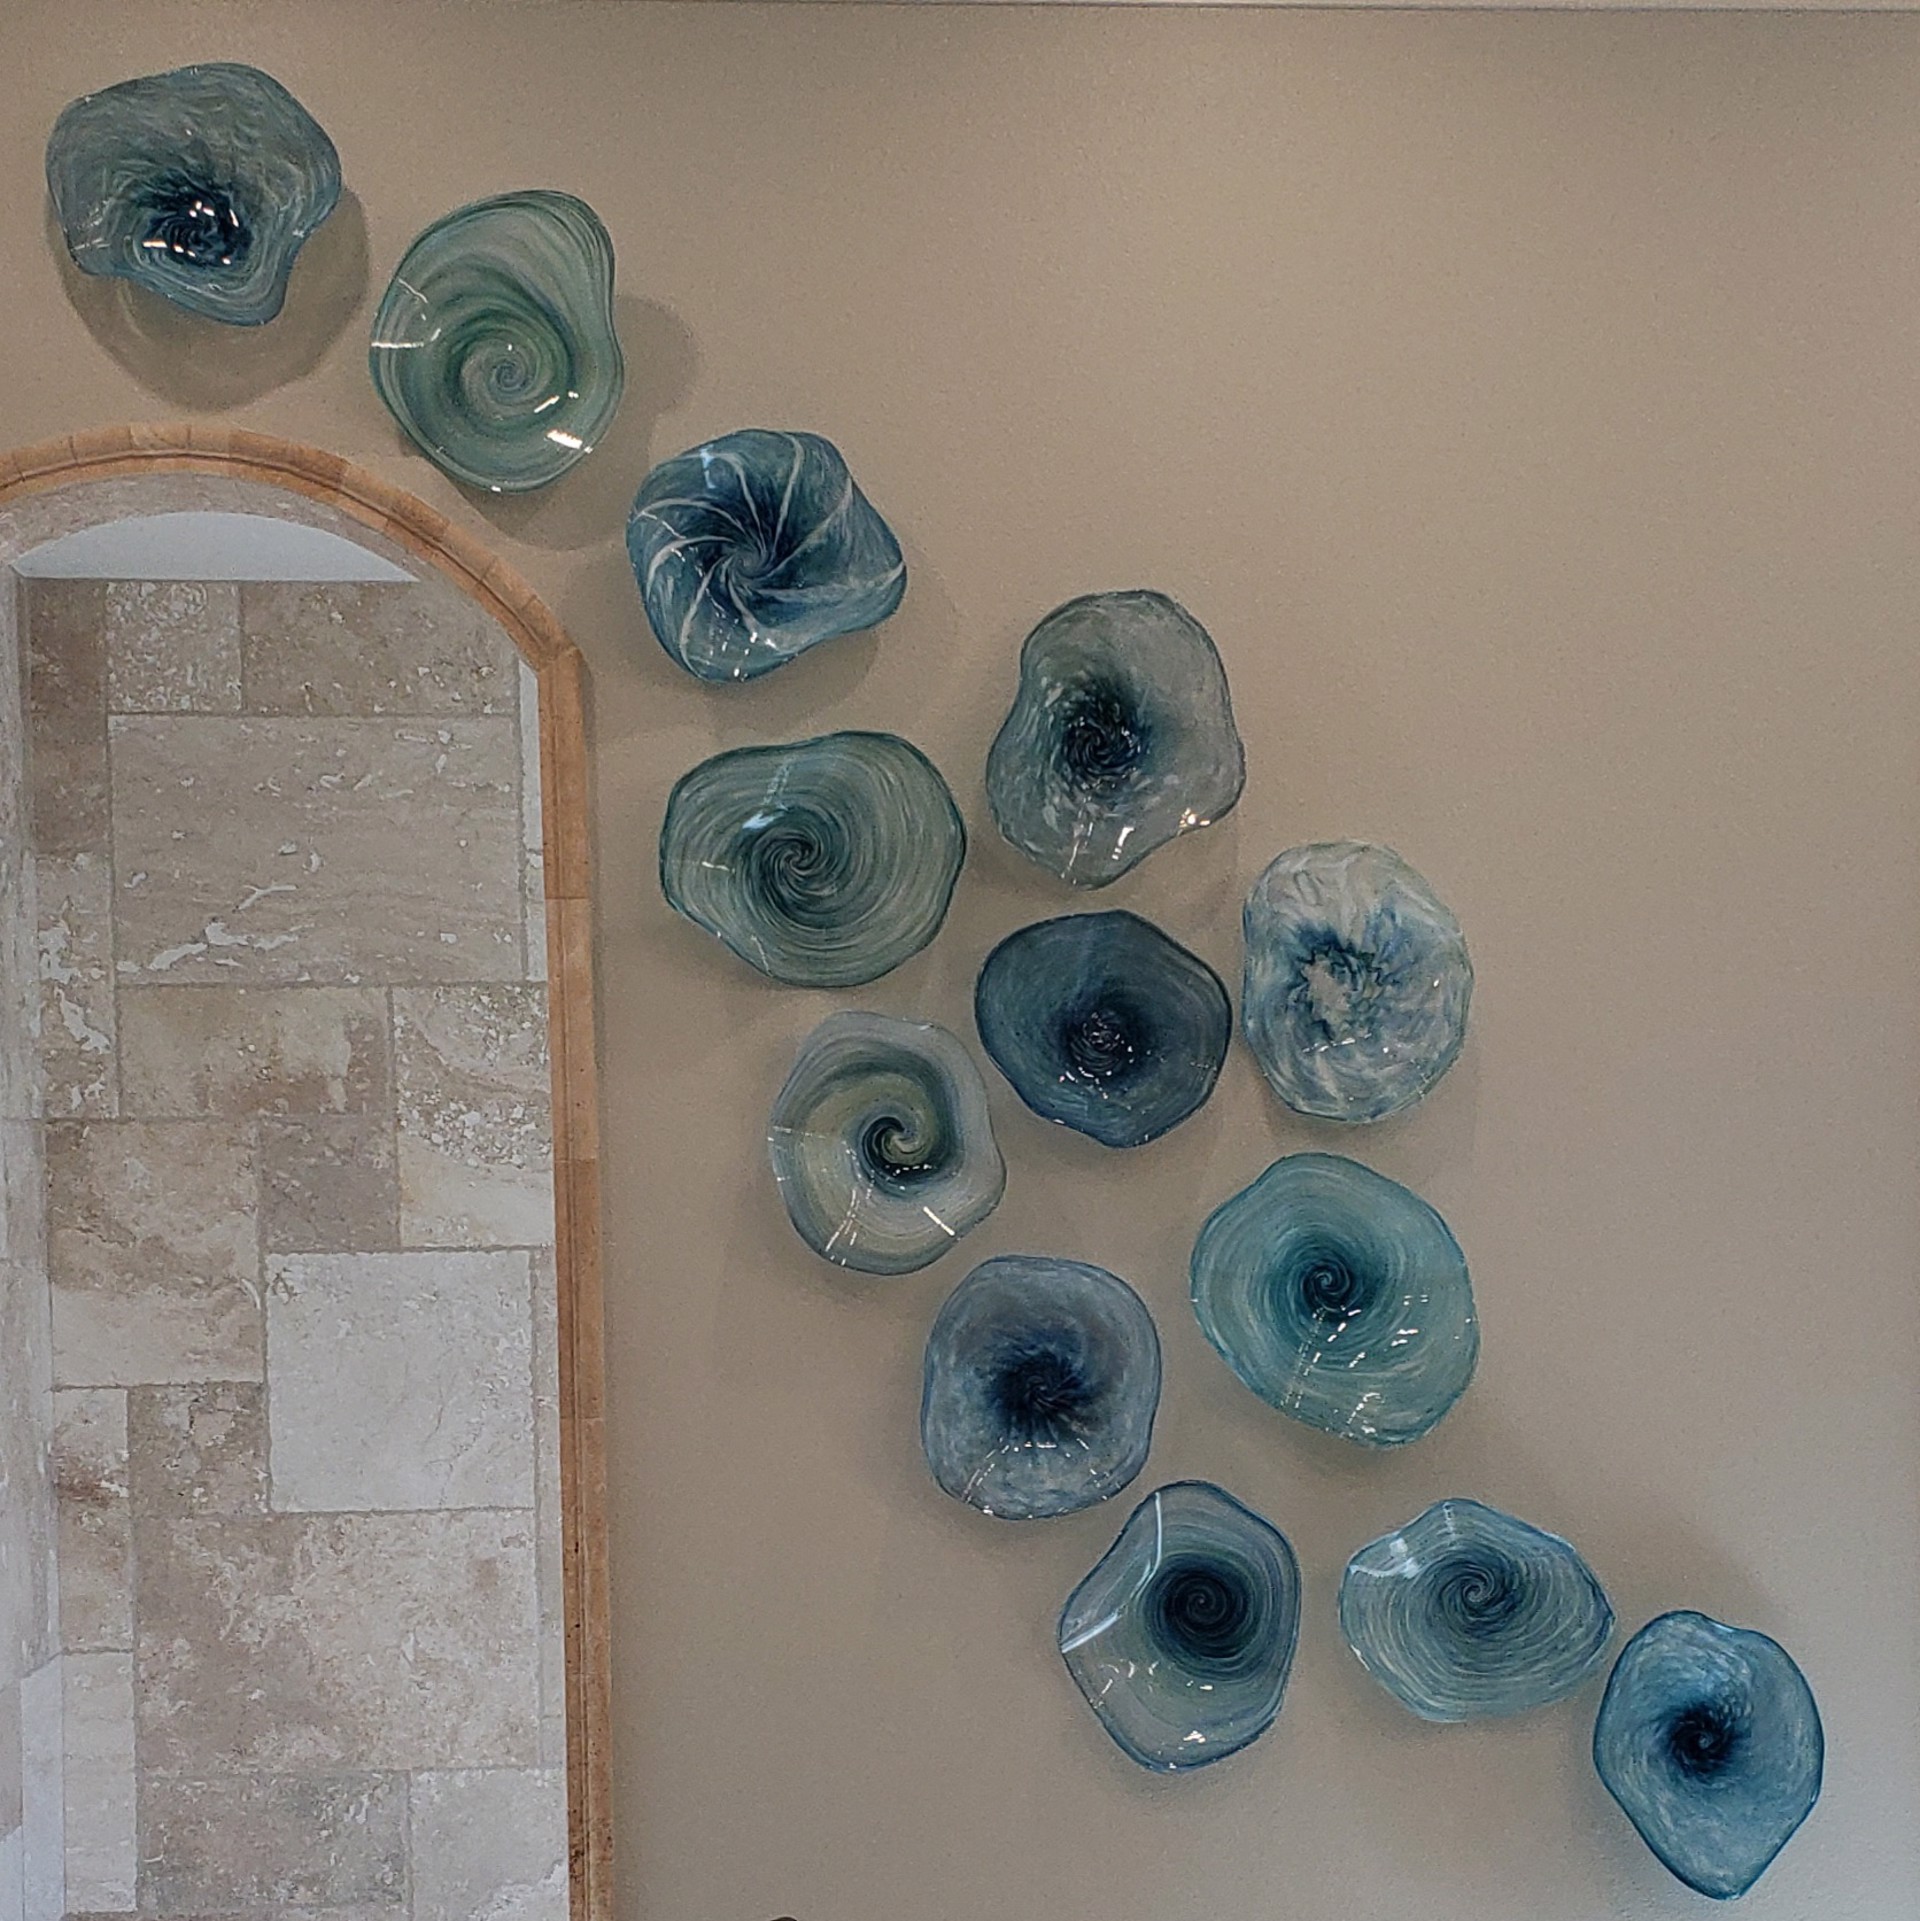 13 Piece Glass Blossoms Installation by T. Miller